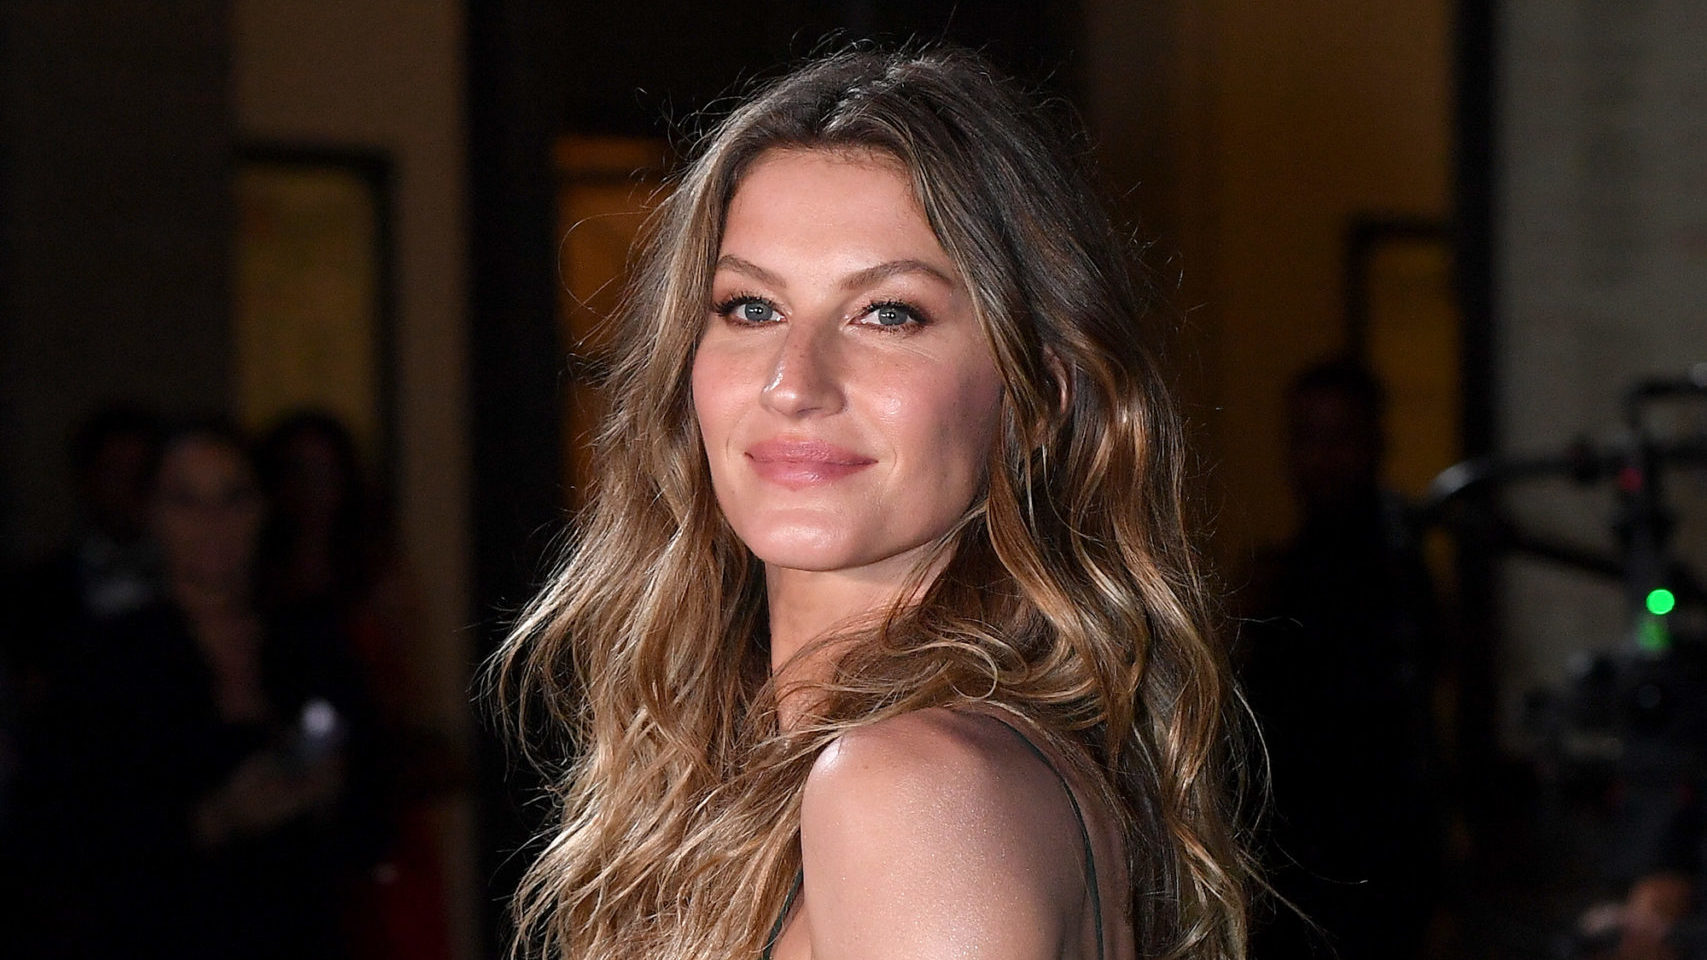 Gisele Bündchen and new relationship rumors two weeks after divorce